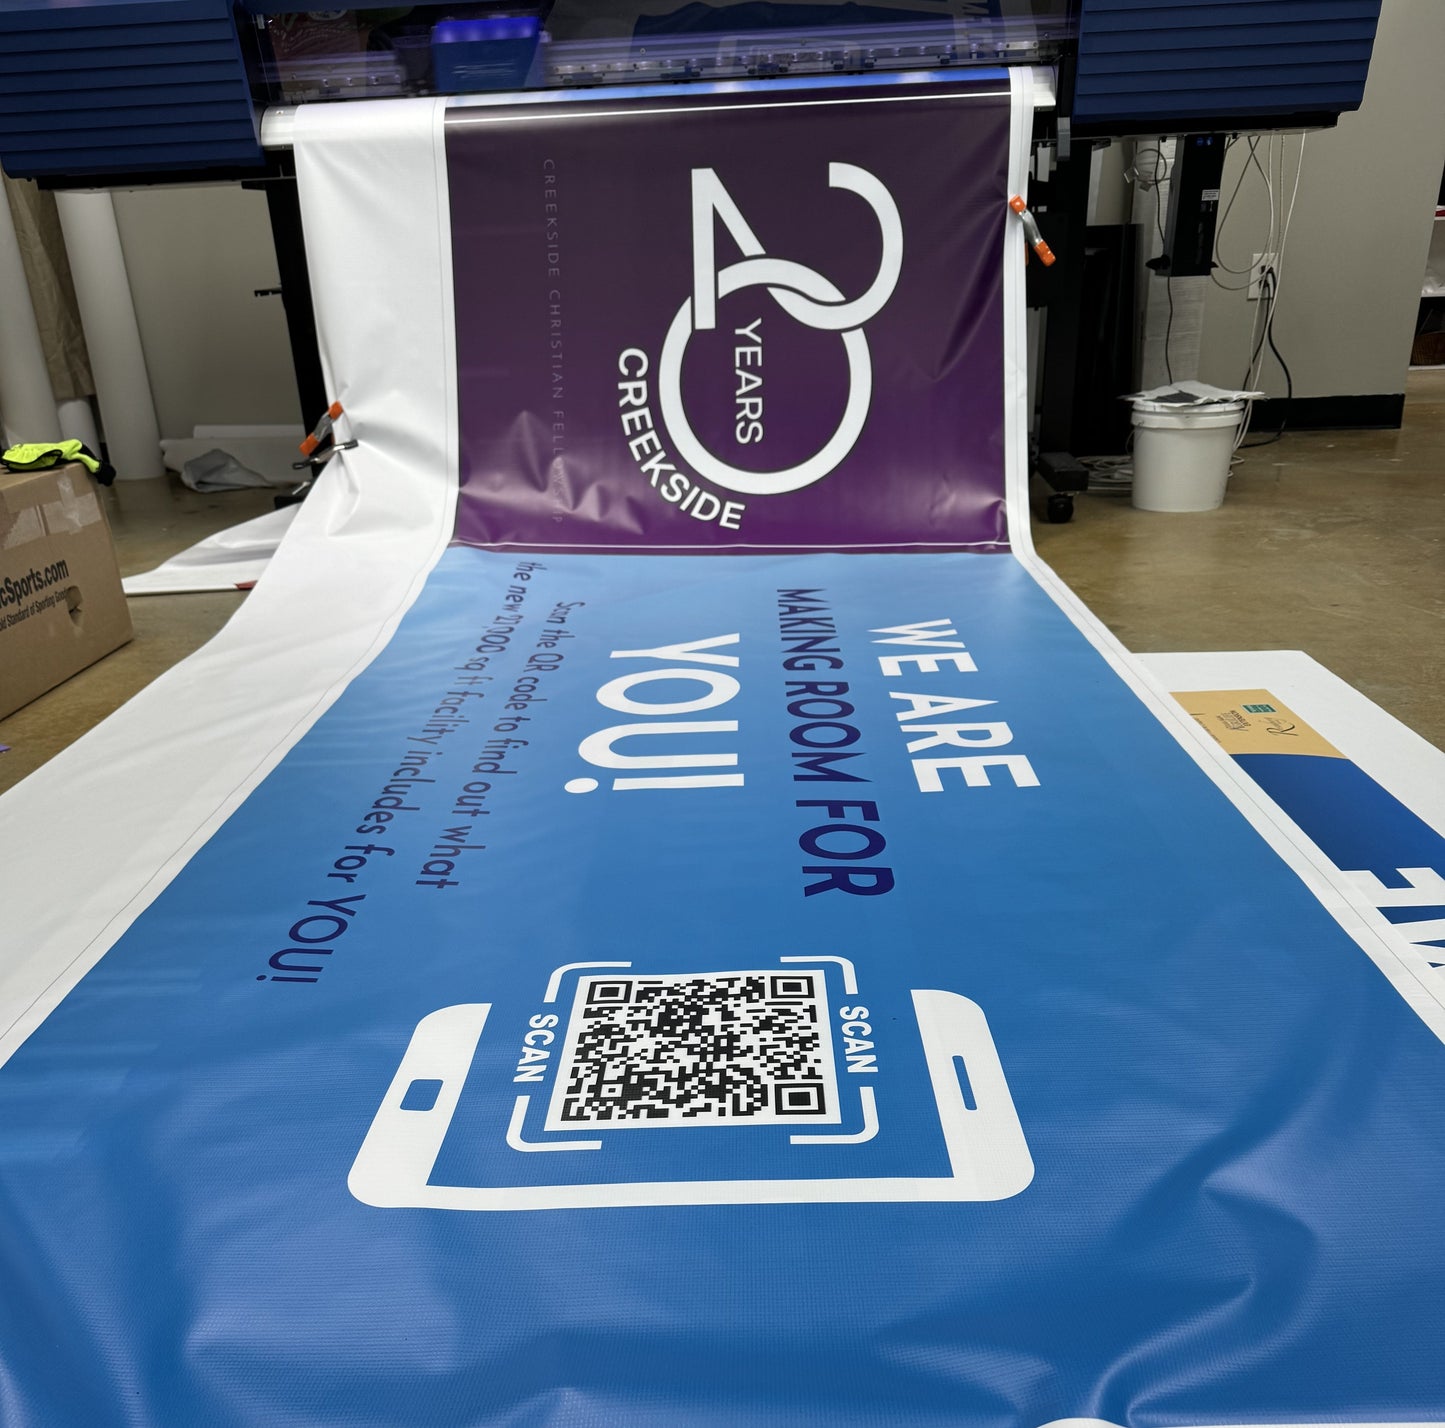 Customizable vinyl banners designed online, offering quick delivery and ideal for trade shows and business promotions.